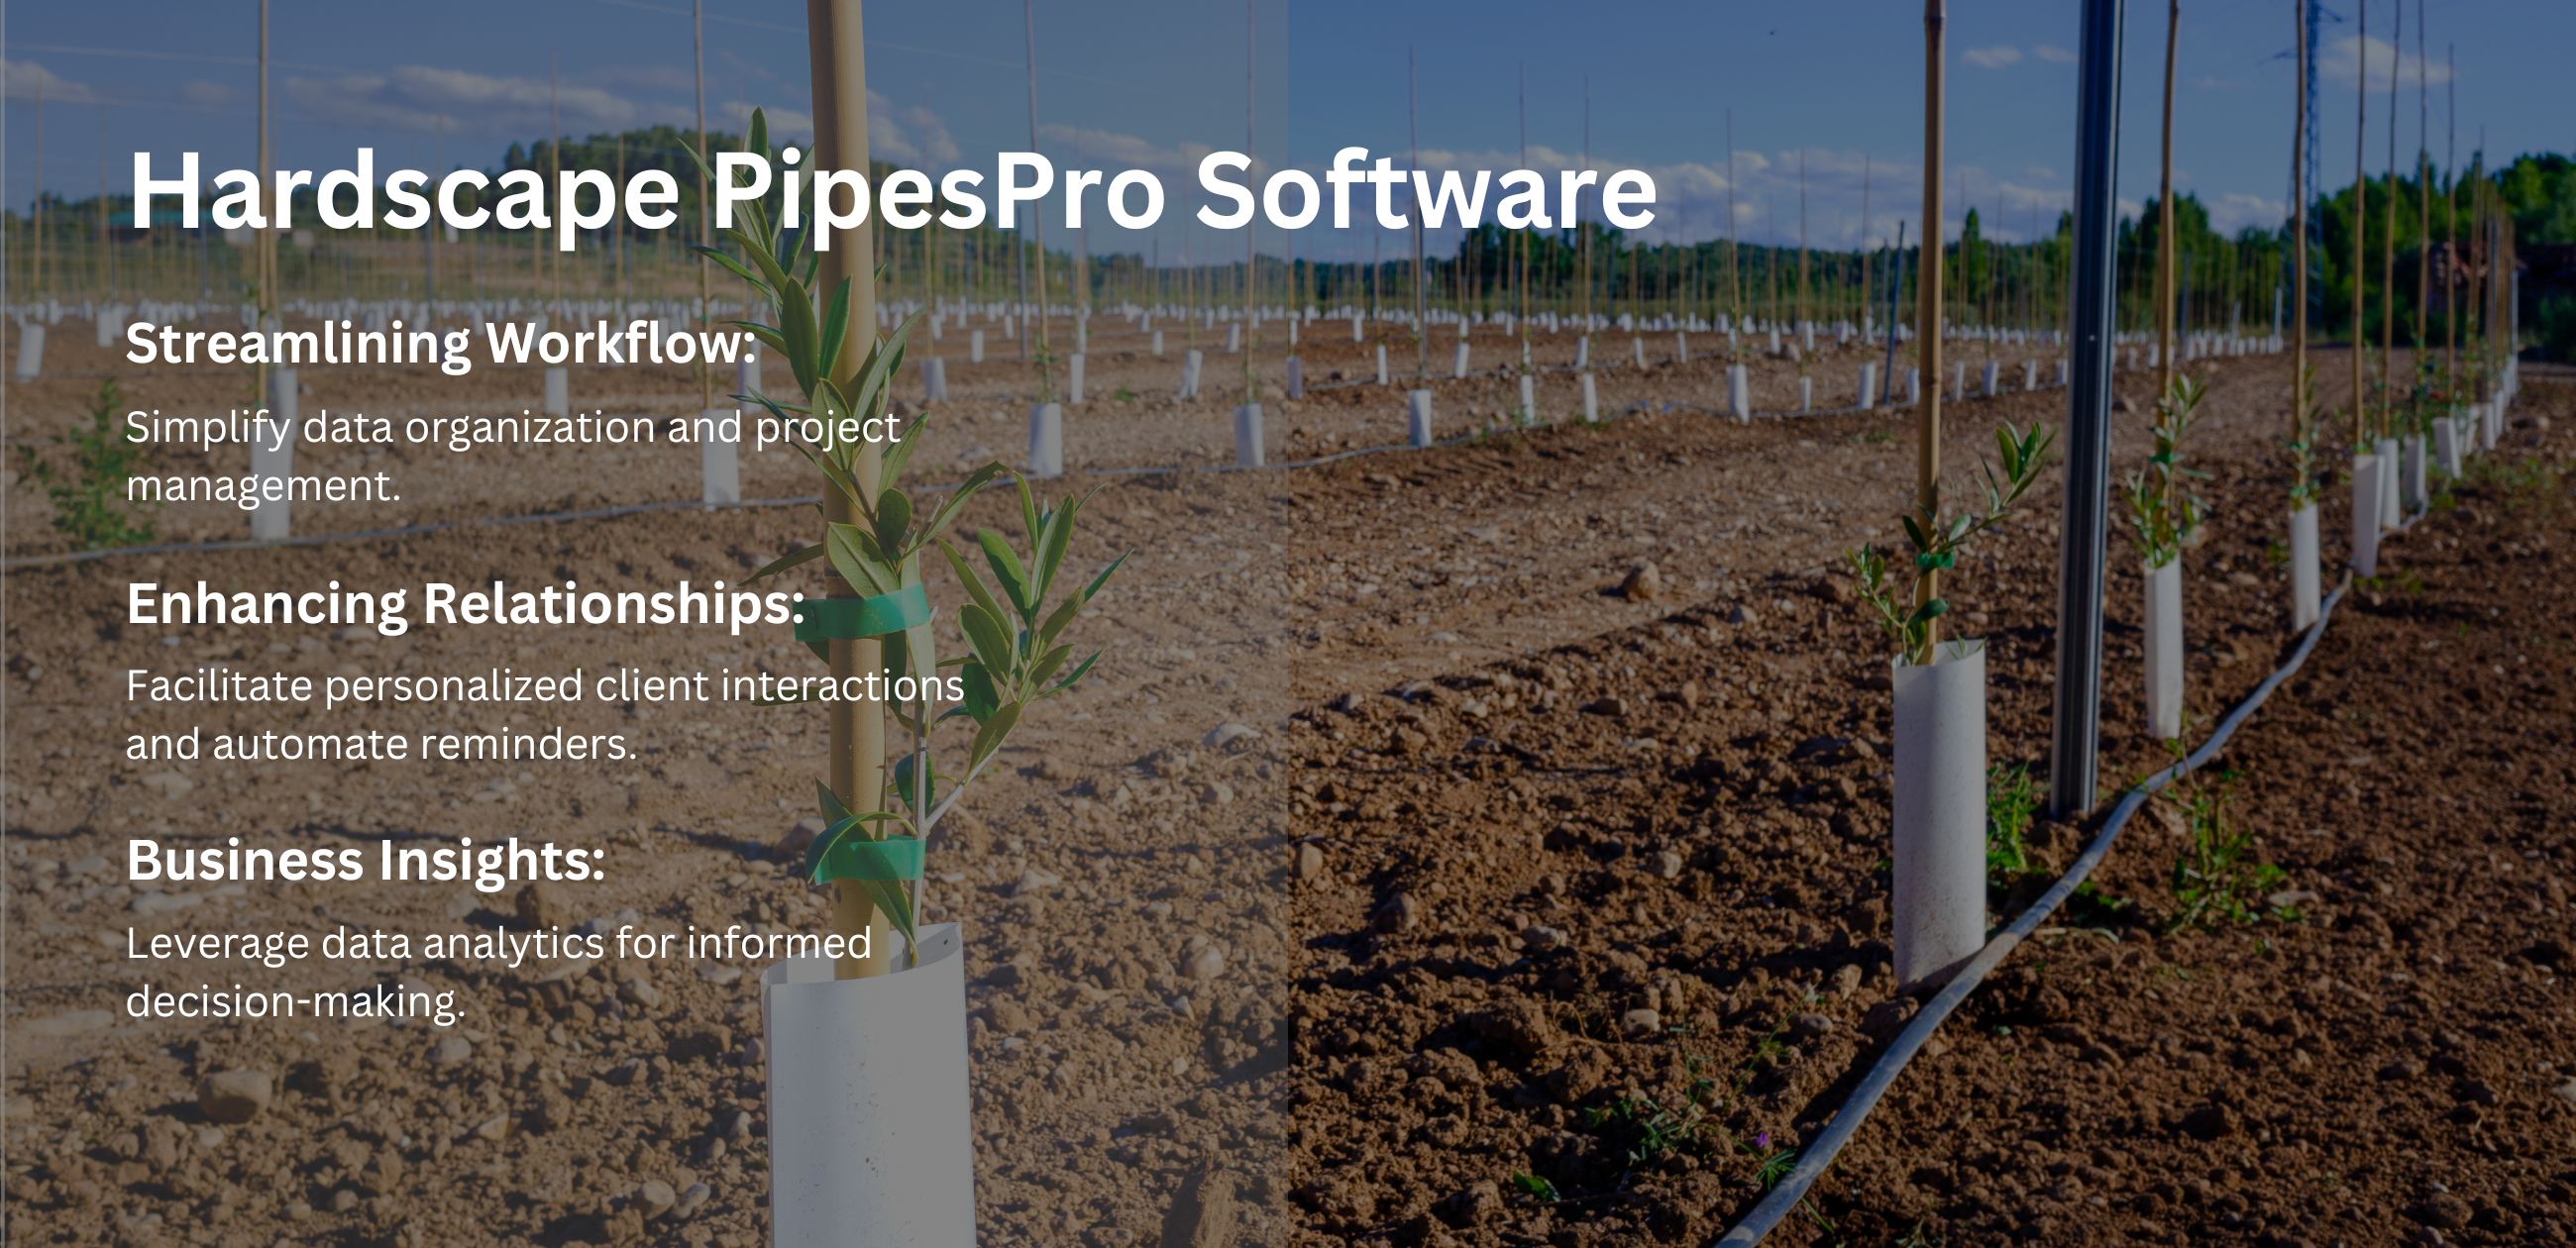 The Power of Hardscape PipesPro Software